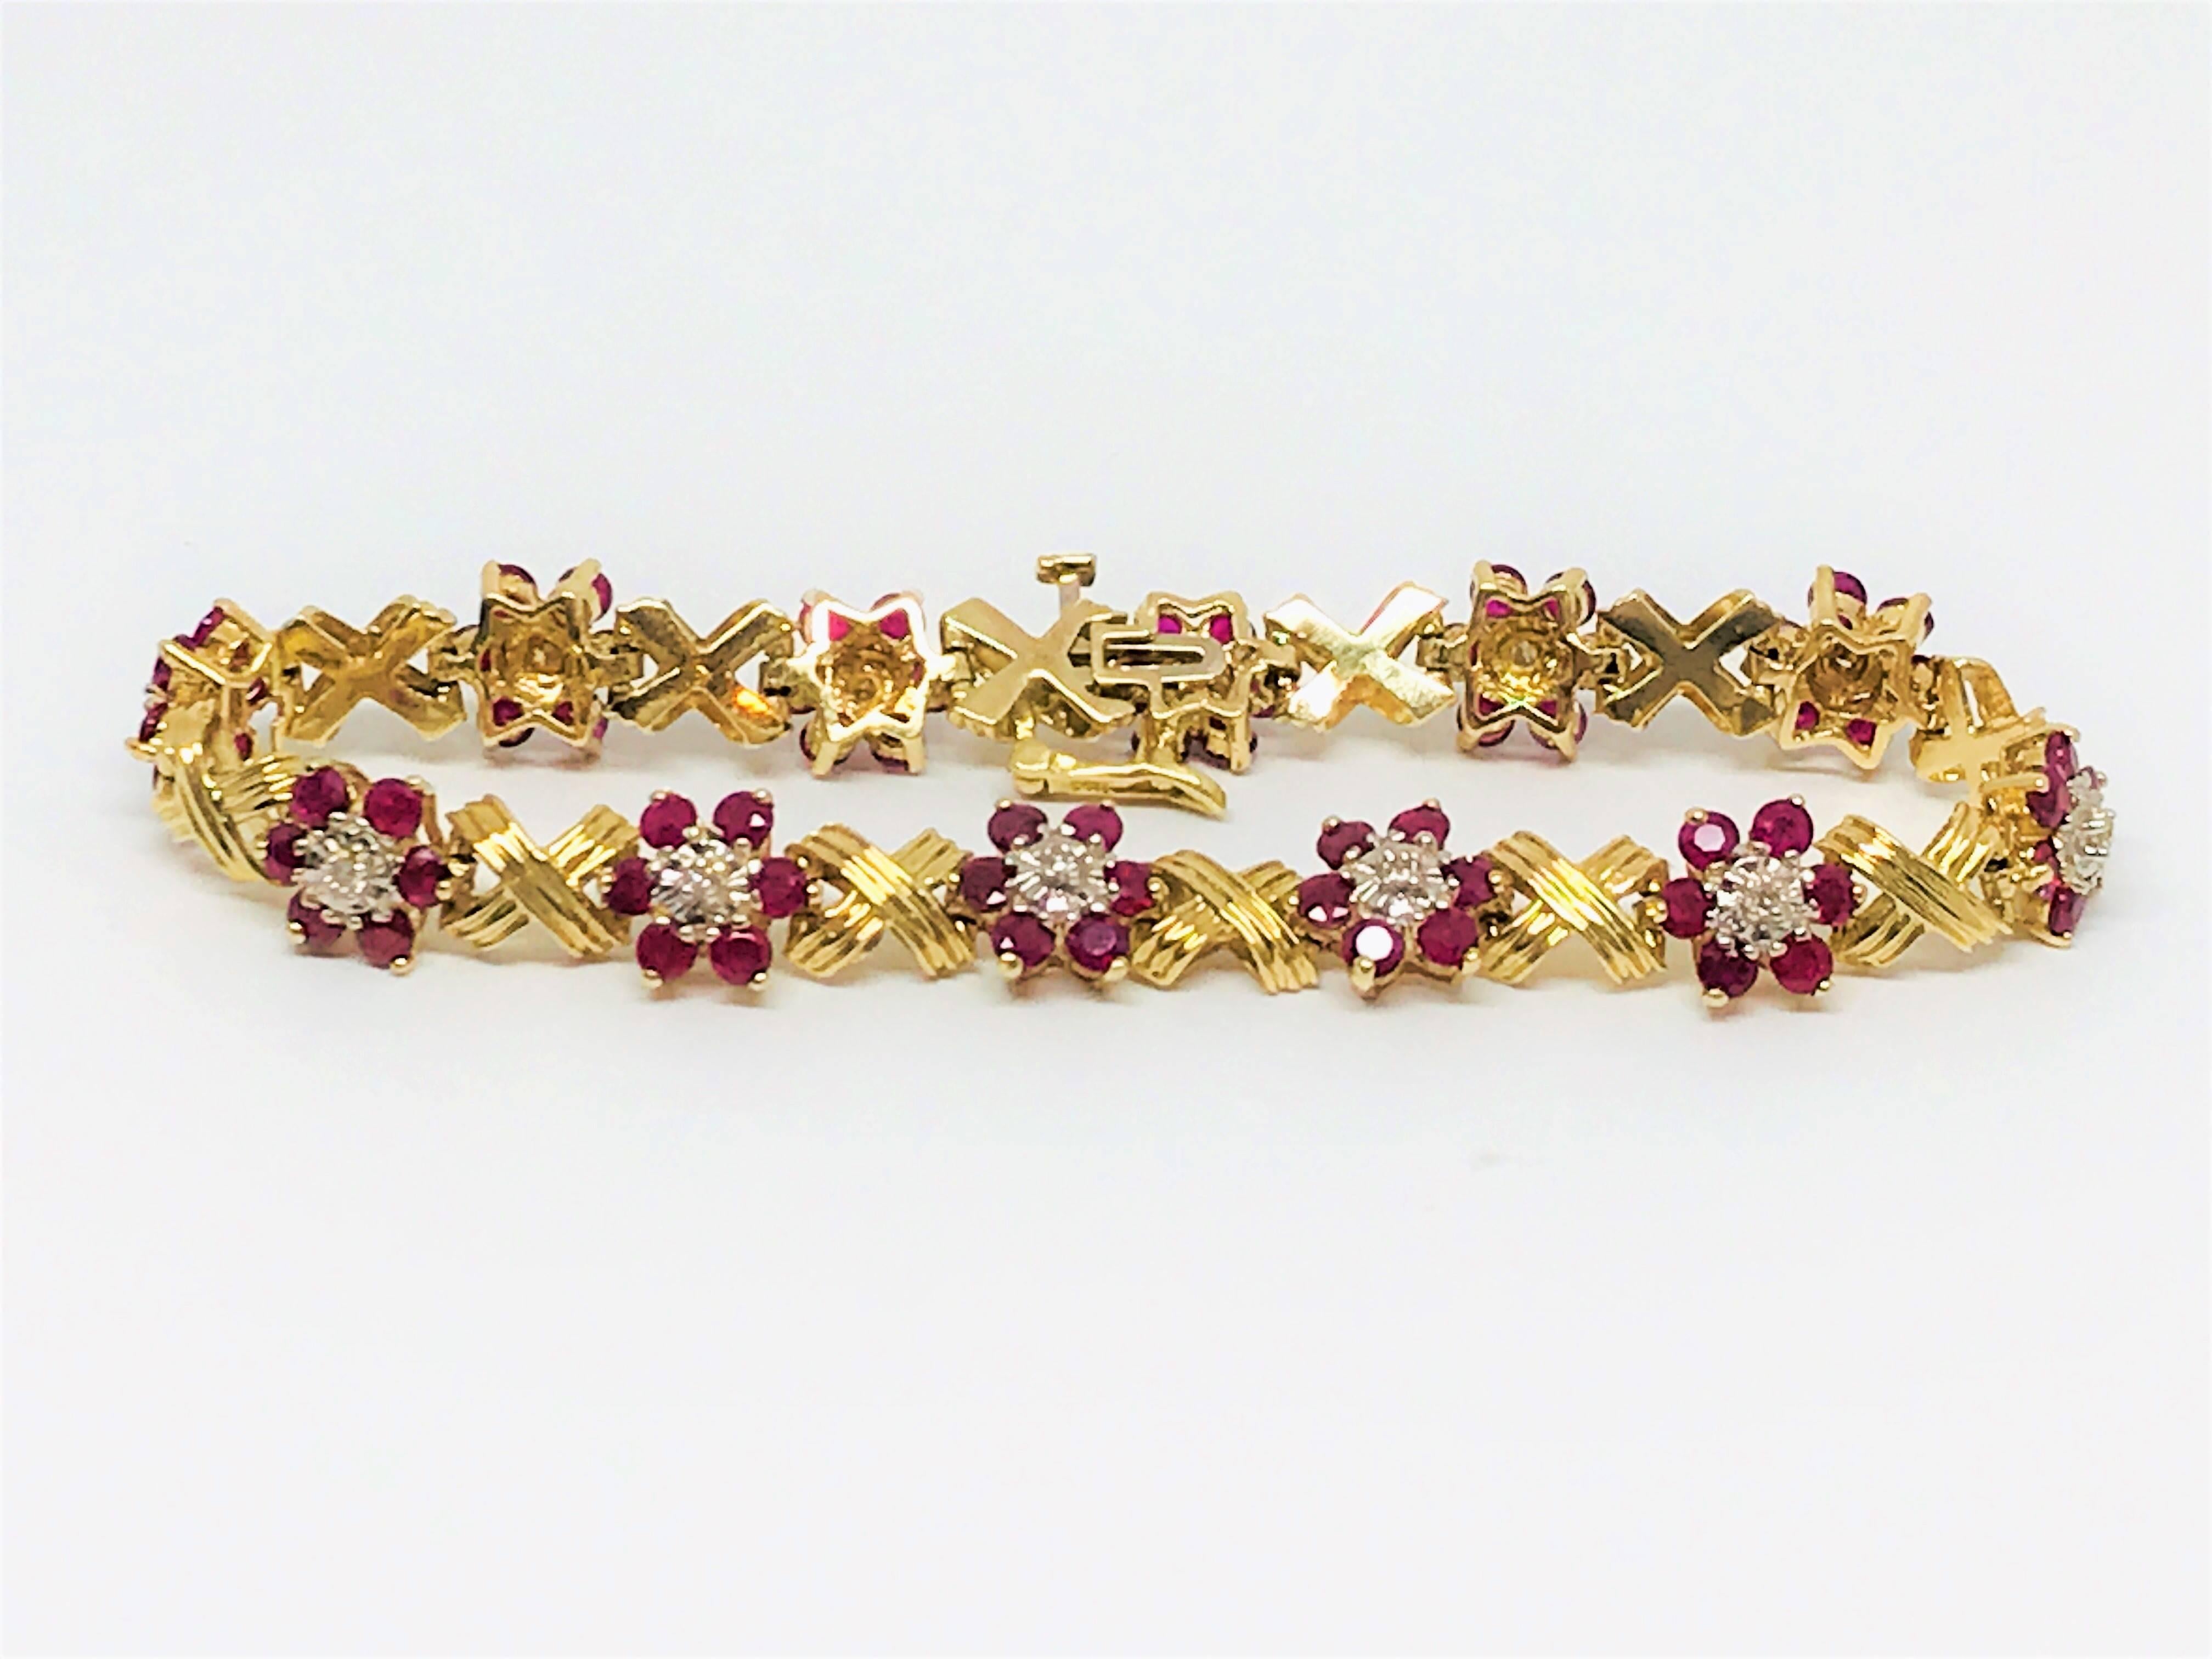 This is a stunningly bold ladies 14k yellow gold Ruby & Diamond Bracelet. There are 
10.0ct's of round cut Ruby & 0.20ct's of white round brilliant Diamonds.
Bracelet lenght is 7.25